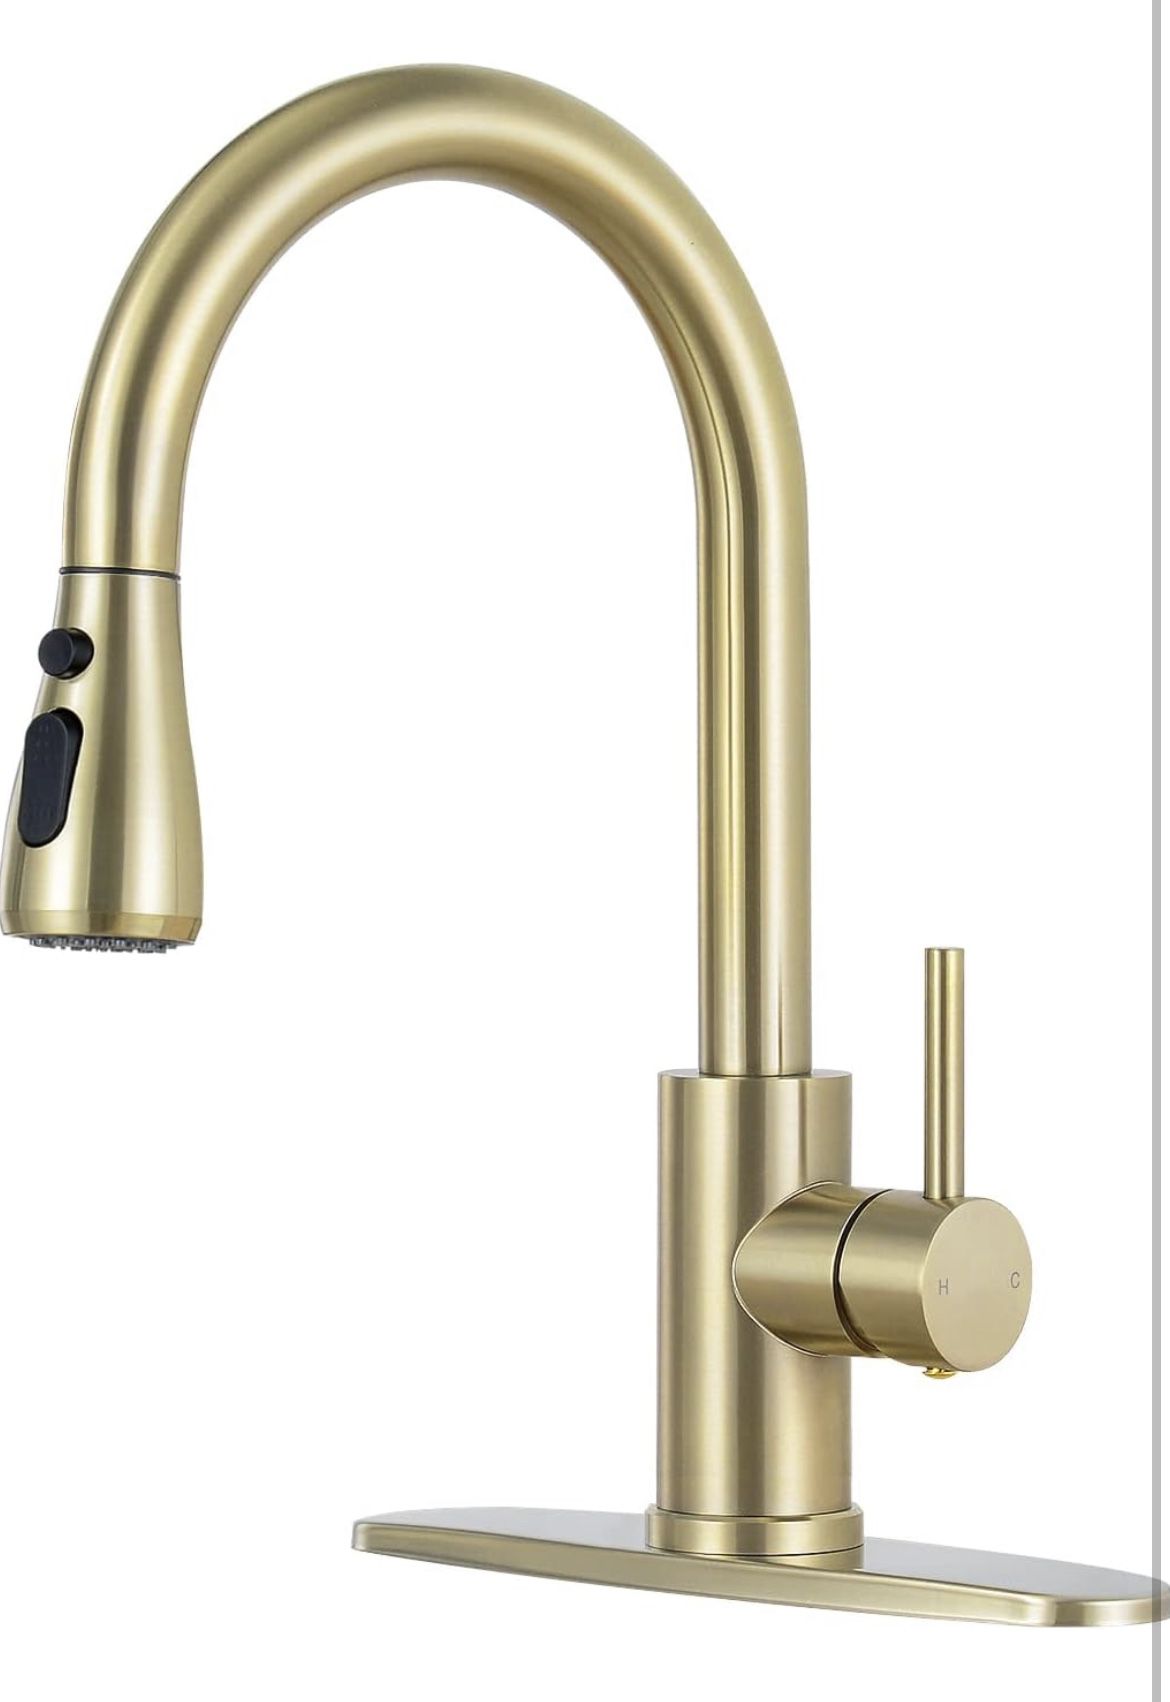 Gold Kitchen Faucet with Pull Down Sprayer, Single Handle RV Kitchen Sink Faucet with Pull Out Sprayer